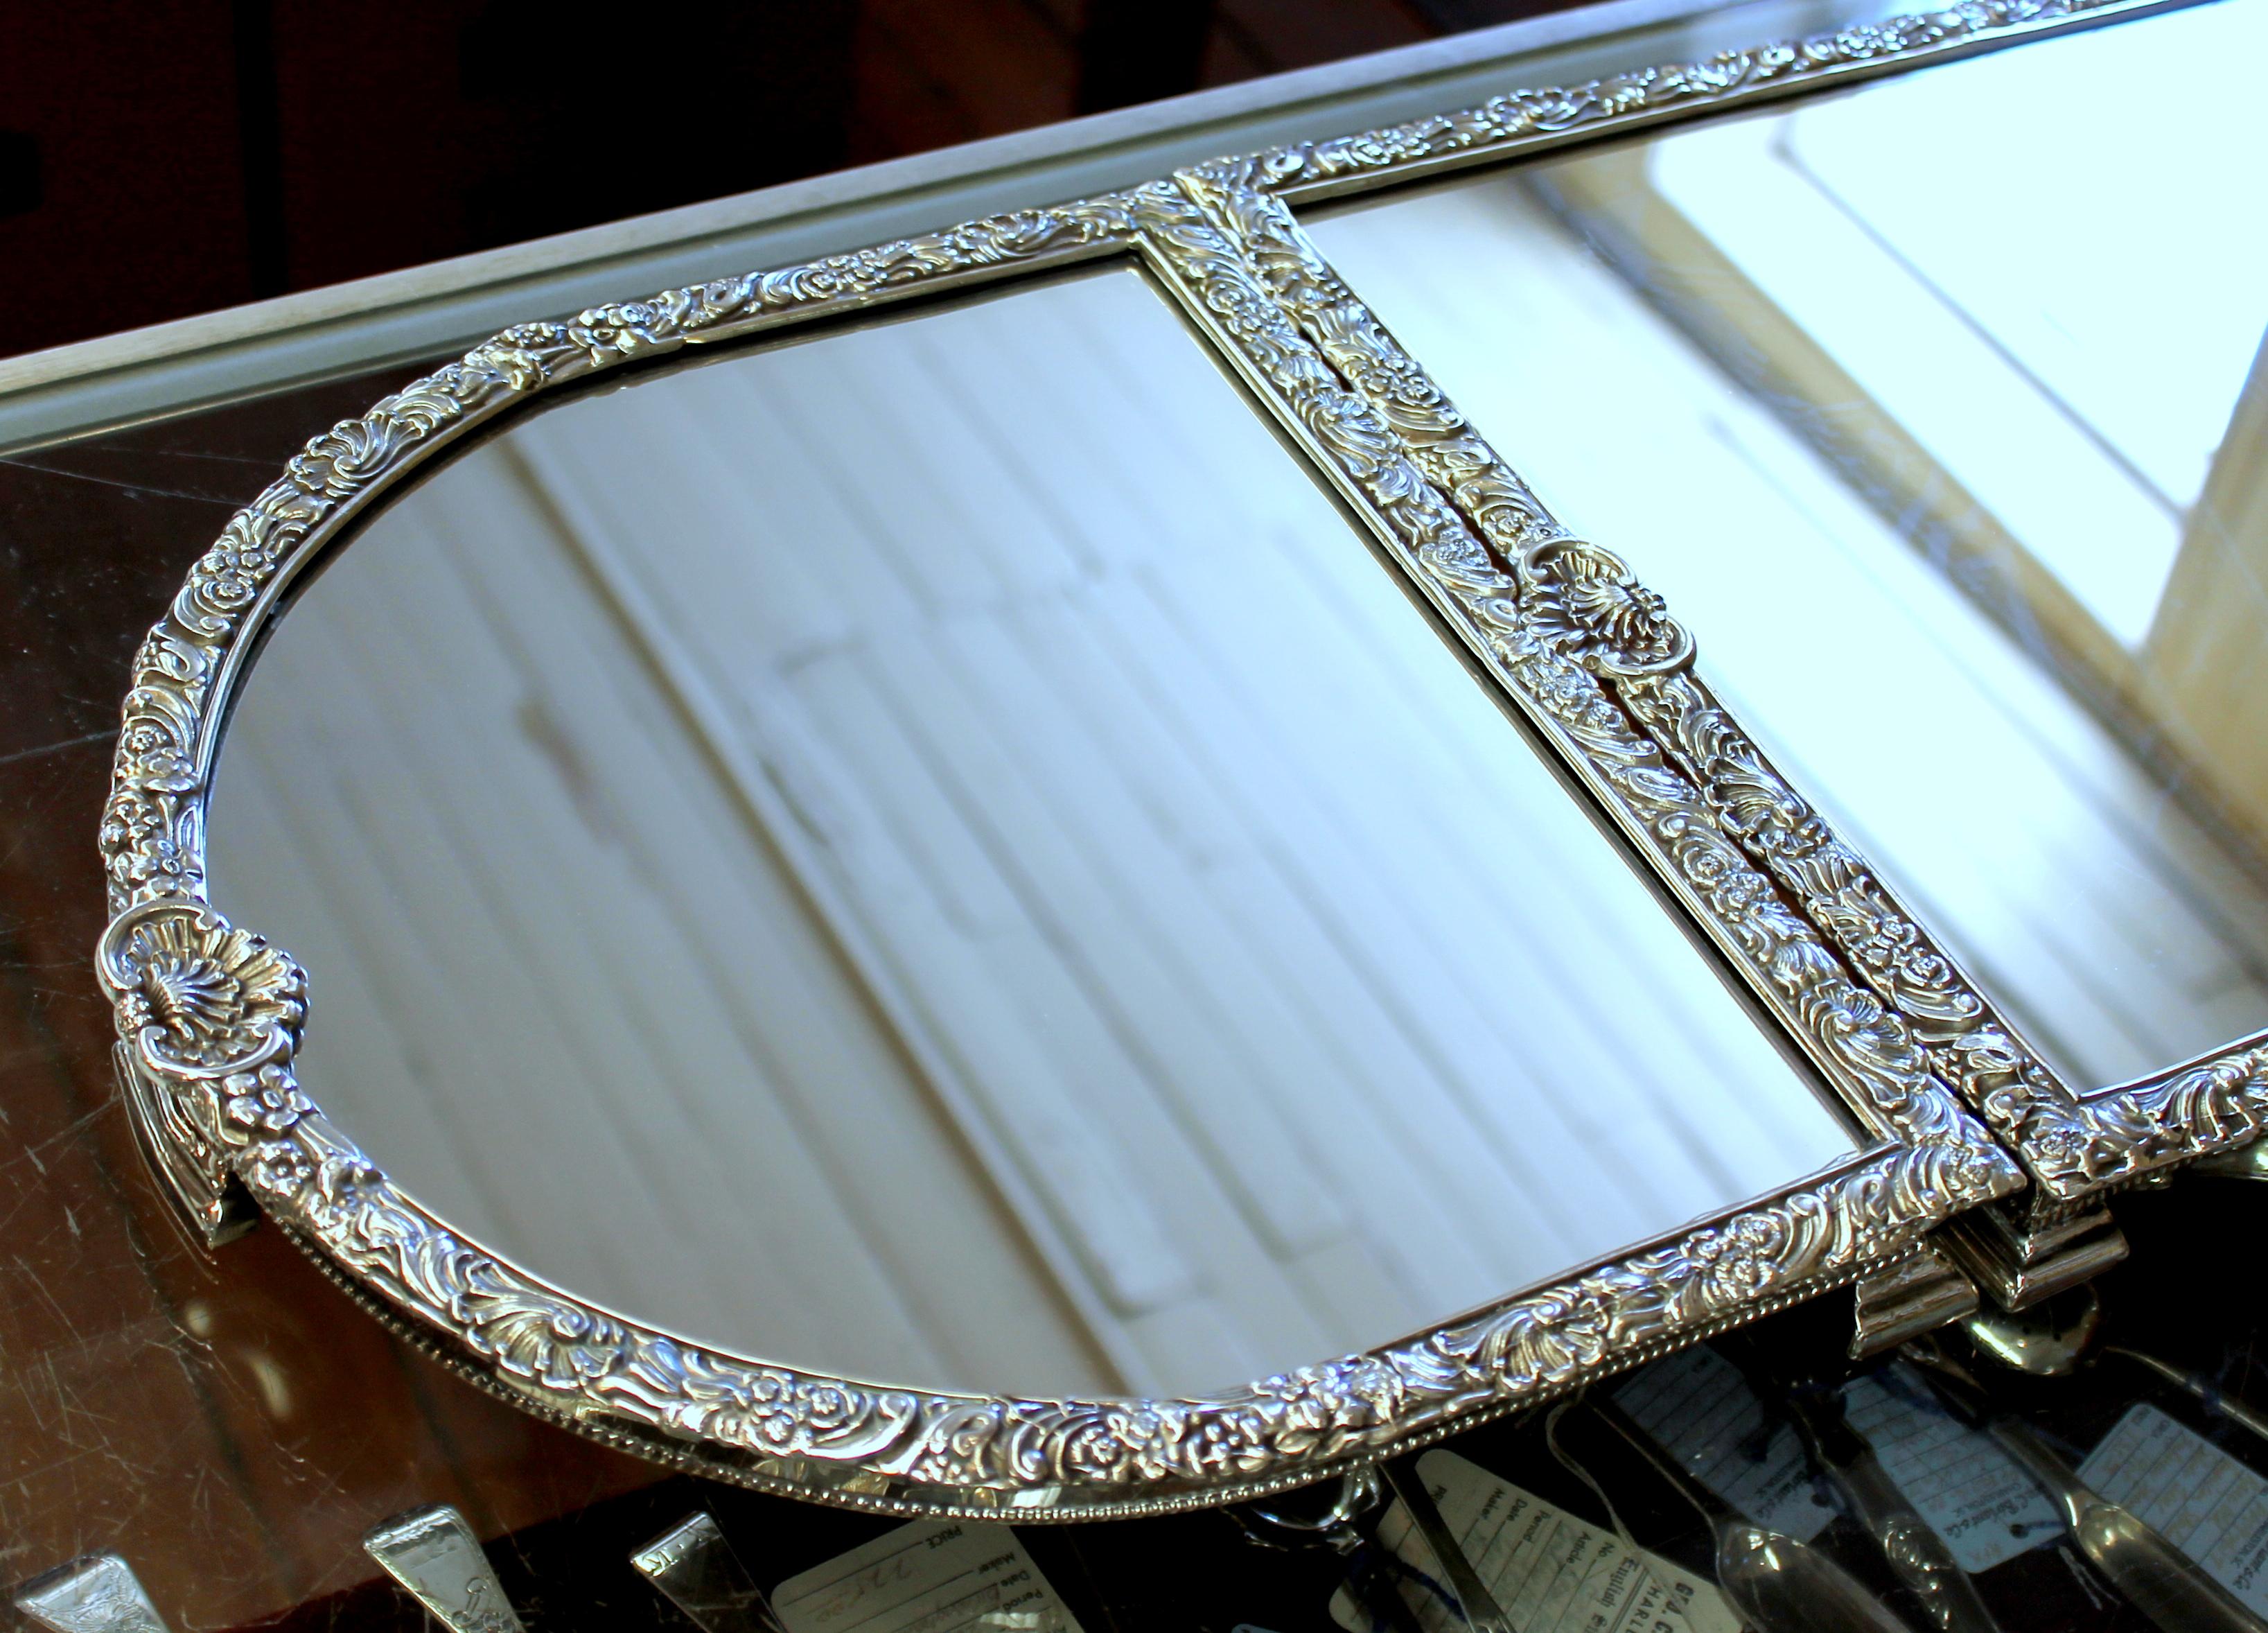 Finest quality reproduction English Sheffield silver-plate Rococo style three-section mirror plateau
-Antique copy- Made in Sheffield, England.

Fabulous early 19th century style applied Rococo mounted border and 